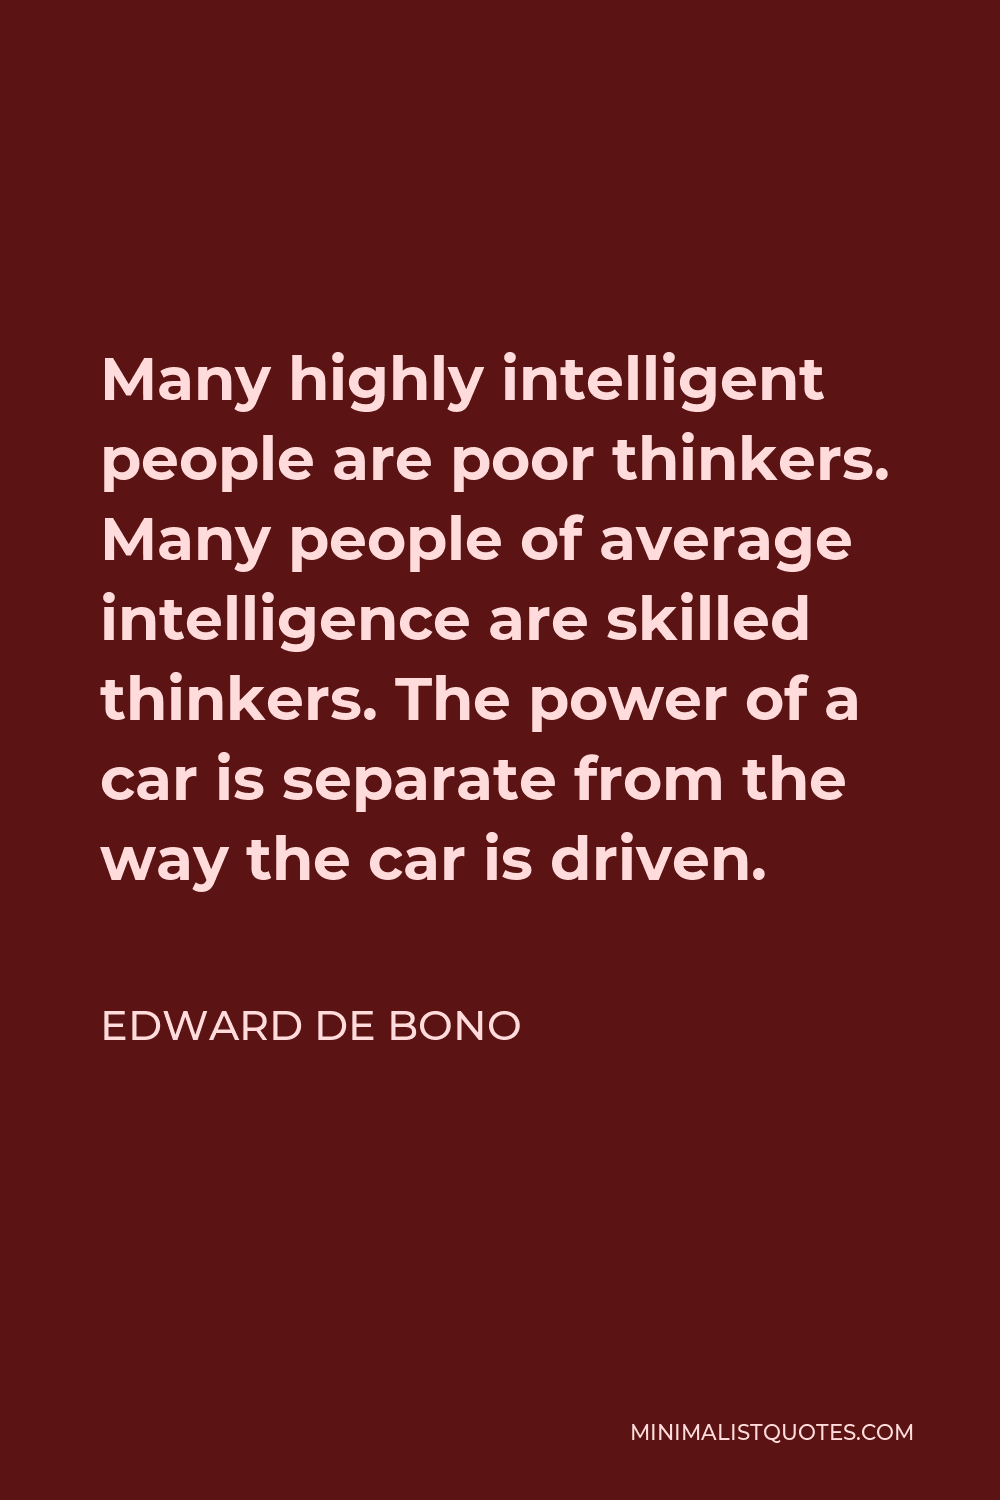 Edward de Bono Quote - Many highly intelligent people are poor thinkers. Many people of average intelligence are skilled thinkers. The power of a car is separate from the way the car is driven.